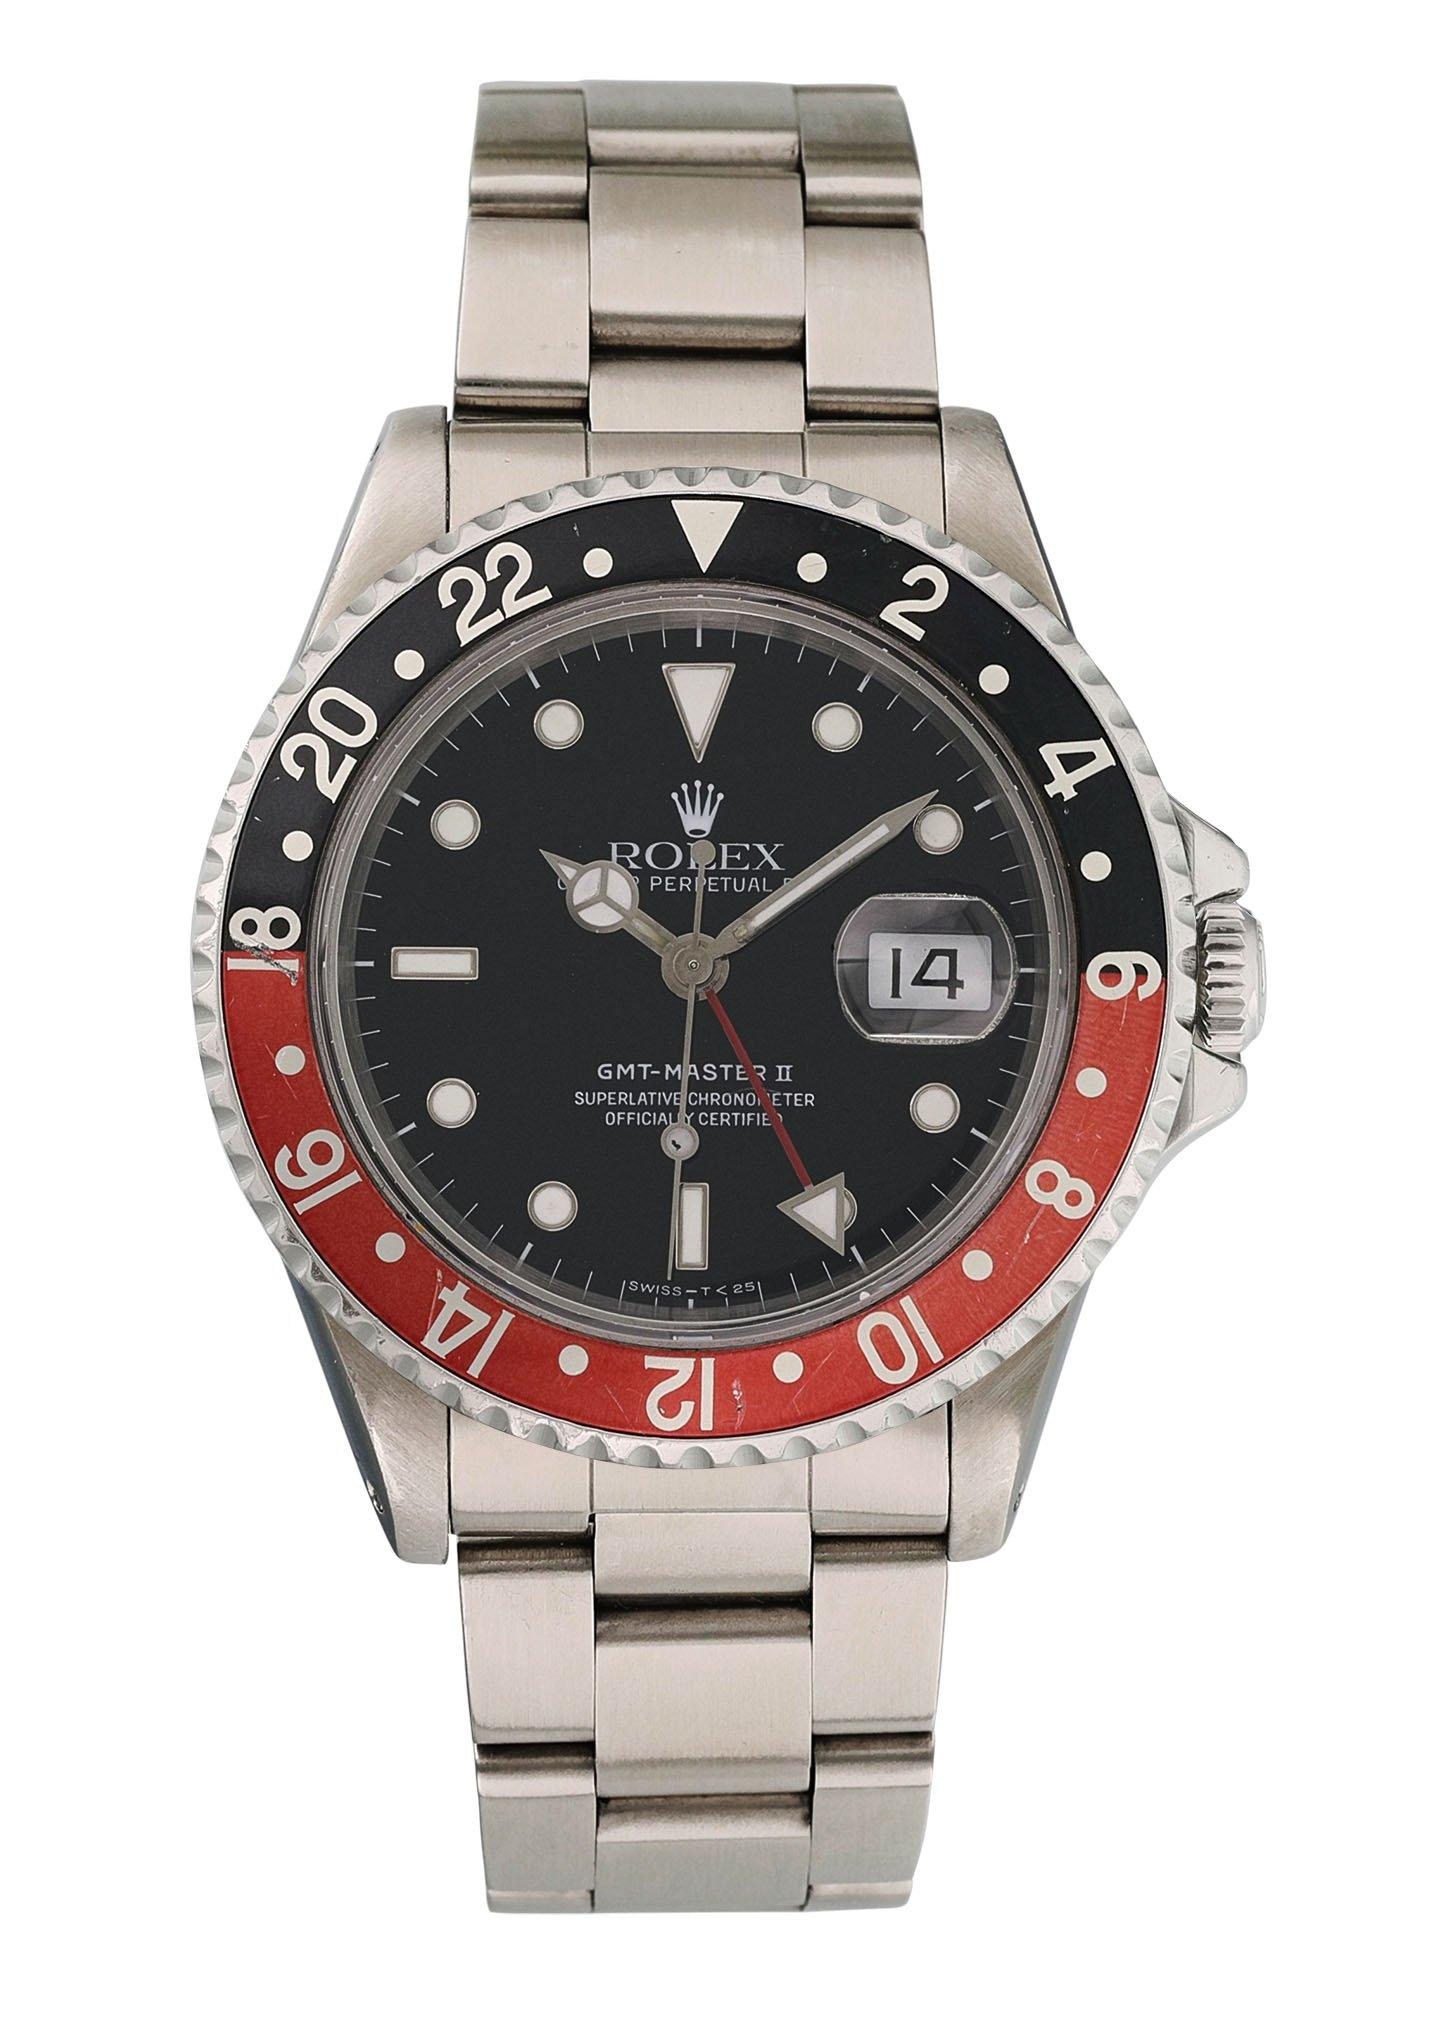 Rolex GMT Master II 16710 Men Watch. 
40mm Stainless Steel case. 
Stainless Steel Bidirectional Coke bezel. 
Black dial with Luminous Steel hands and index, dot hour markers. 
Minute markers on the outer dial. 
Date display at the 3 o'clock